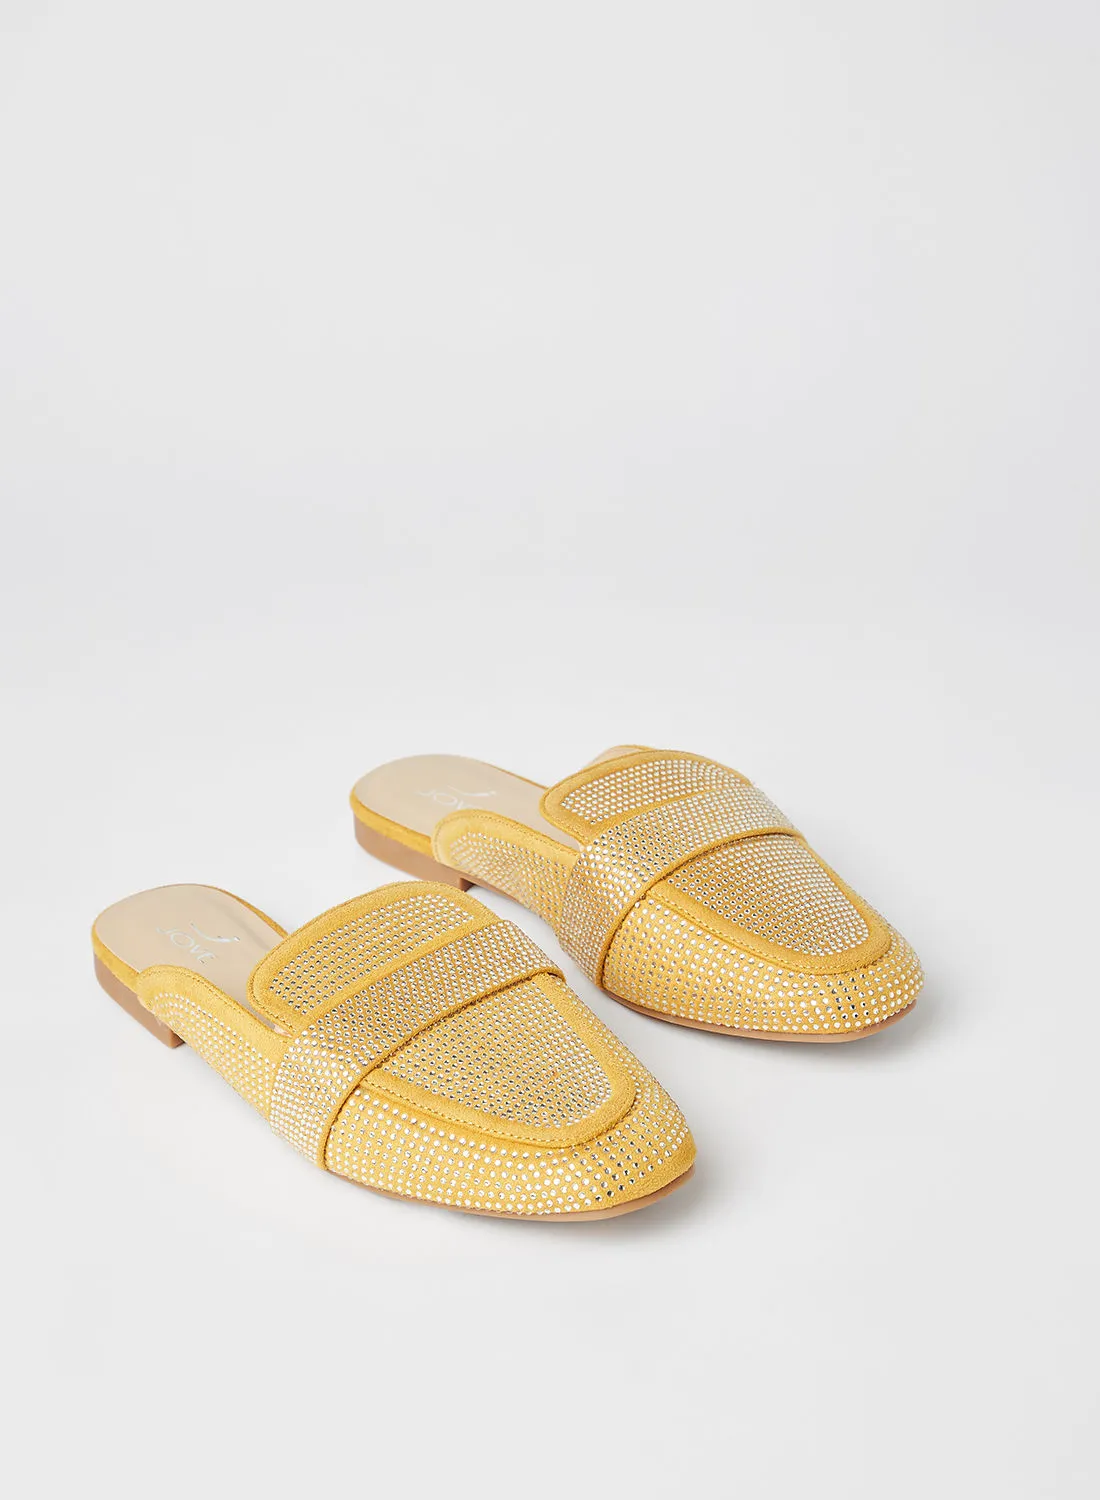 Jove Casual Textured Square Toe Slip-On Mules Yellow/Silver